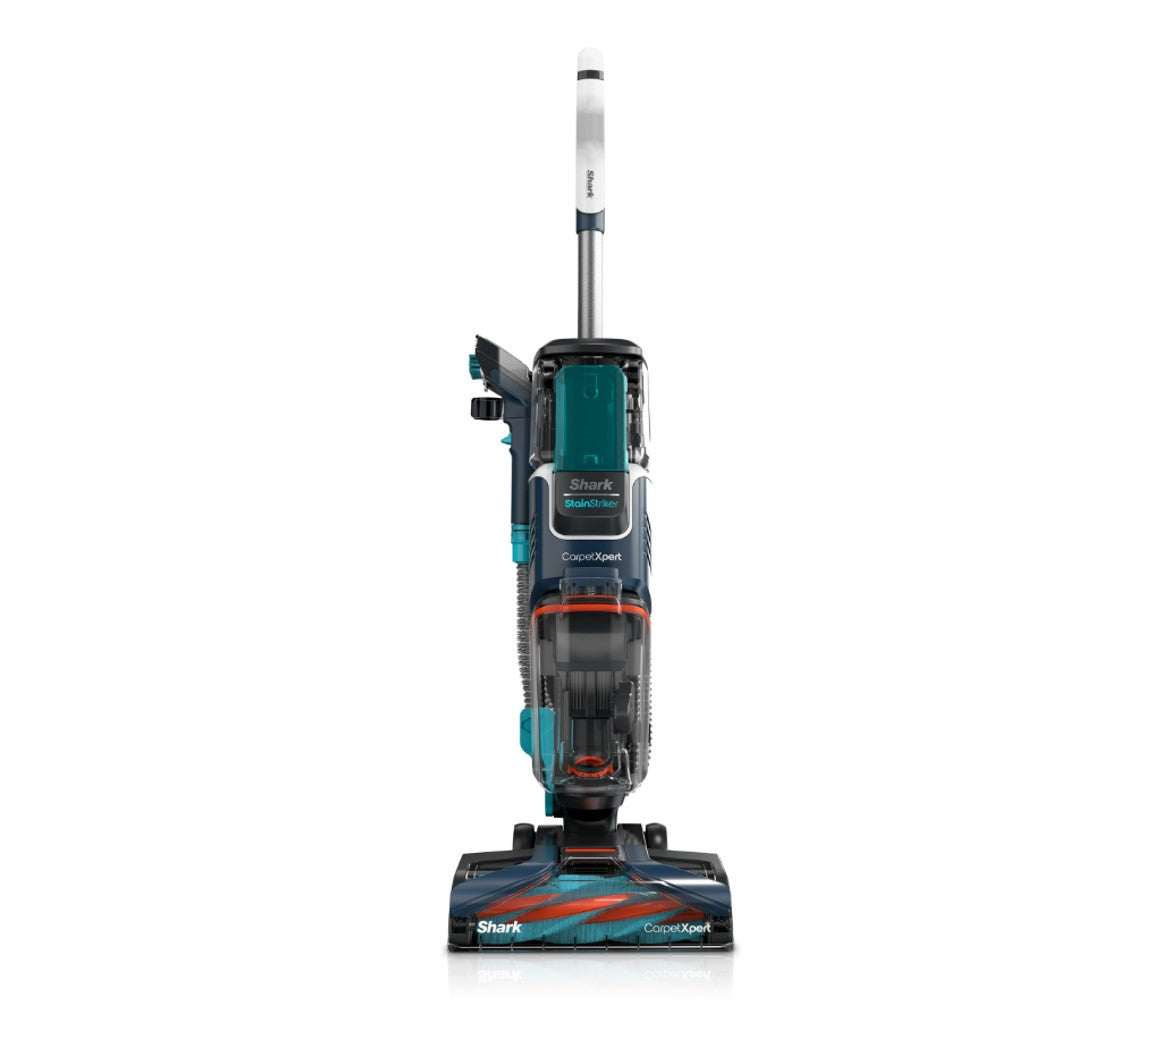 Shark R-EX205 CarpetXpert Upright Vacuum for Carpet, Rugs & Upholstery with StainStriker, Spot & Stain Cleaner, Teal - Certified Refurbished